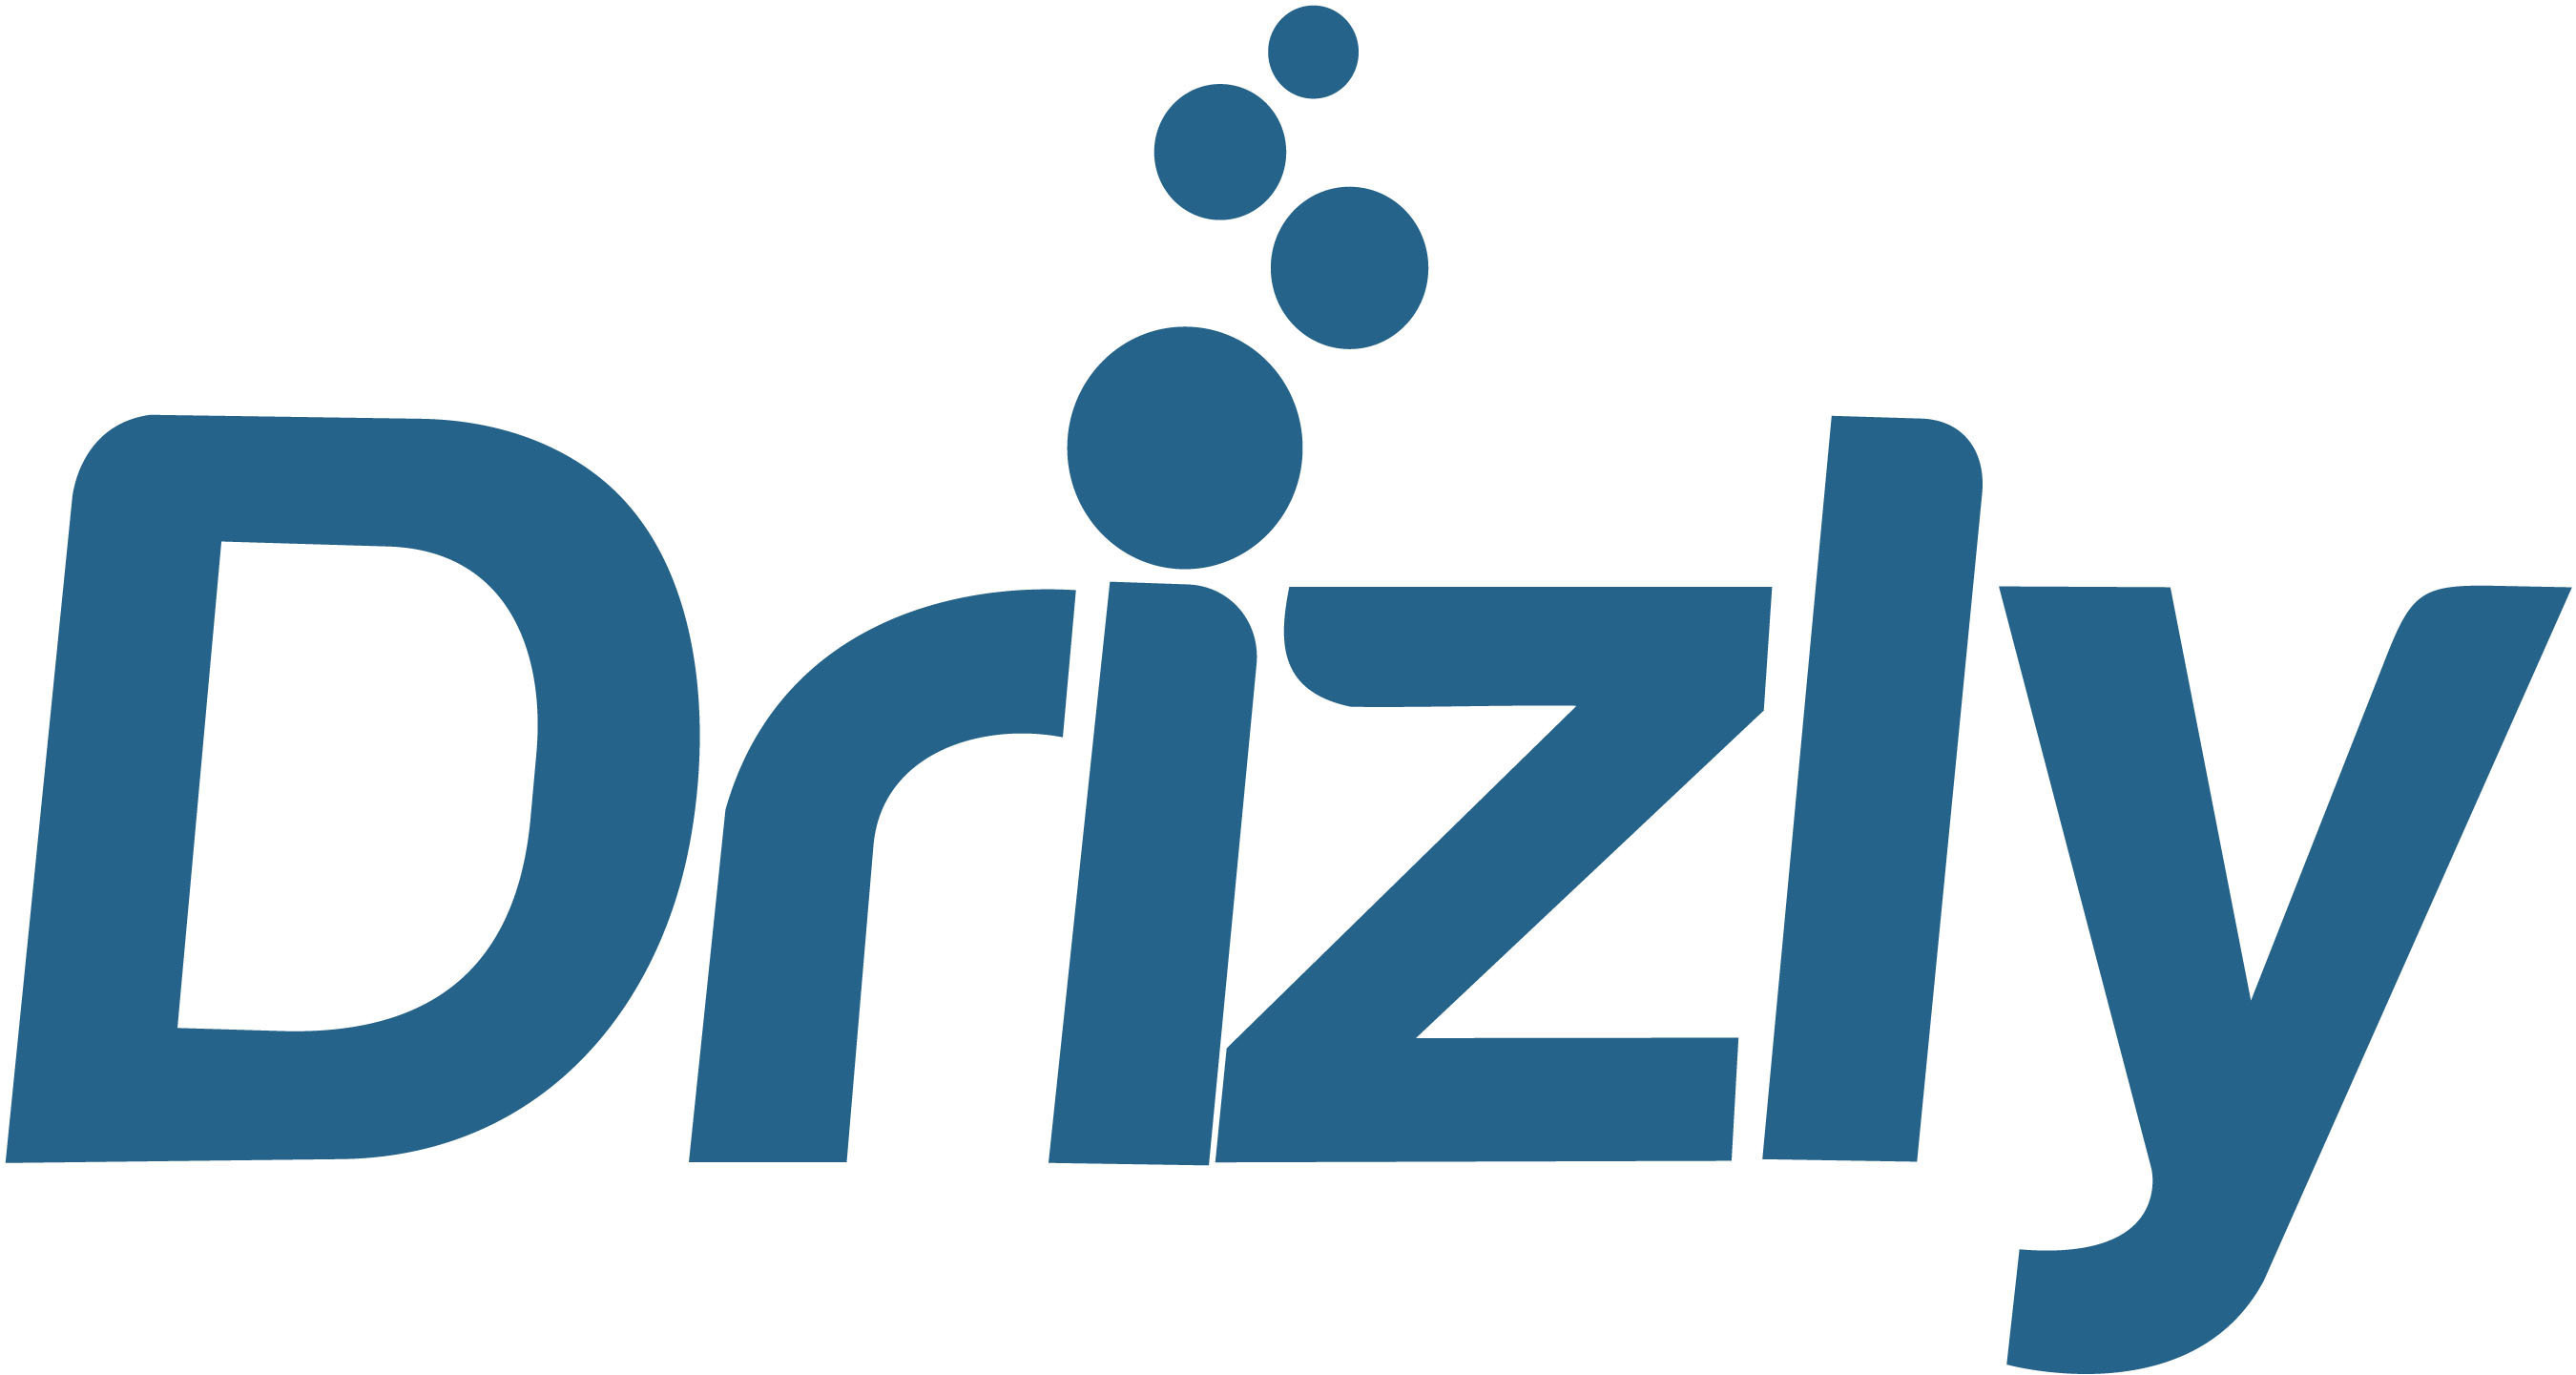 Drizly is the smartphone app for fast, convenient alcohol delivery. (PRNewsFoto/Drizly) (PRNewsFoto/Drizly)